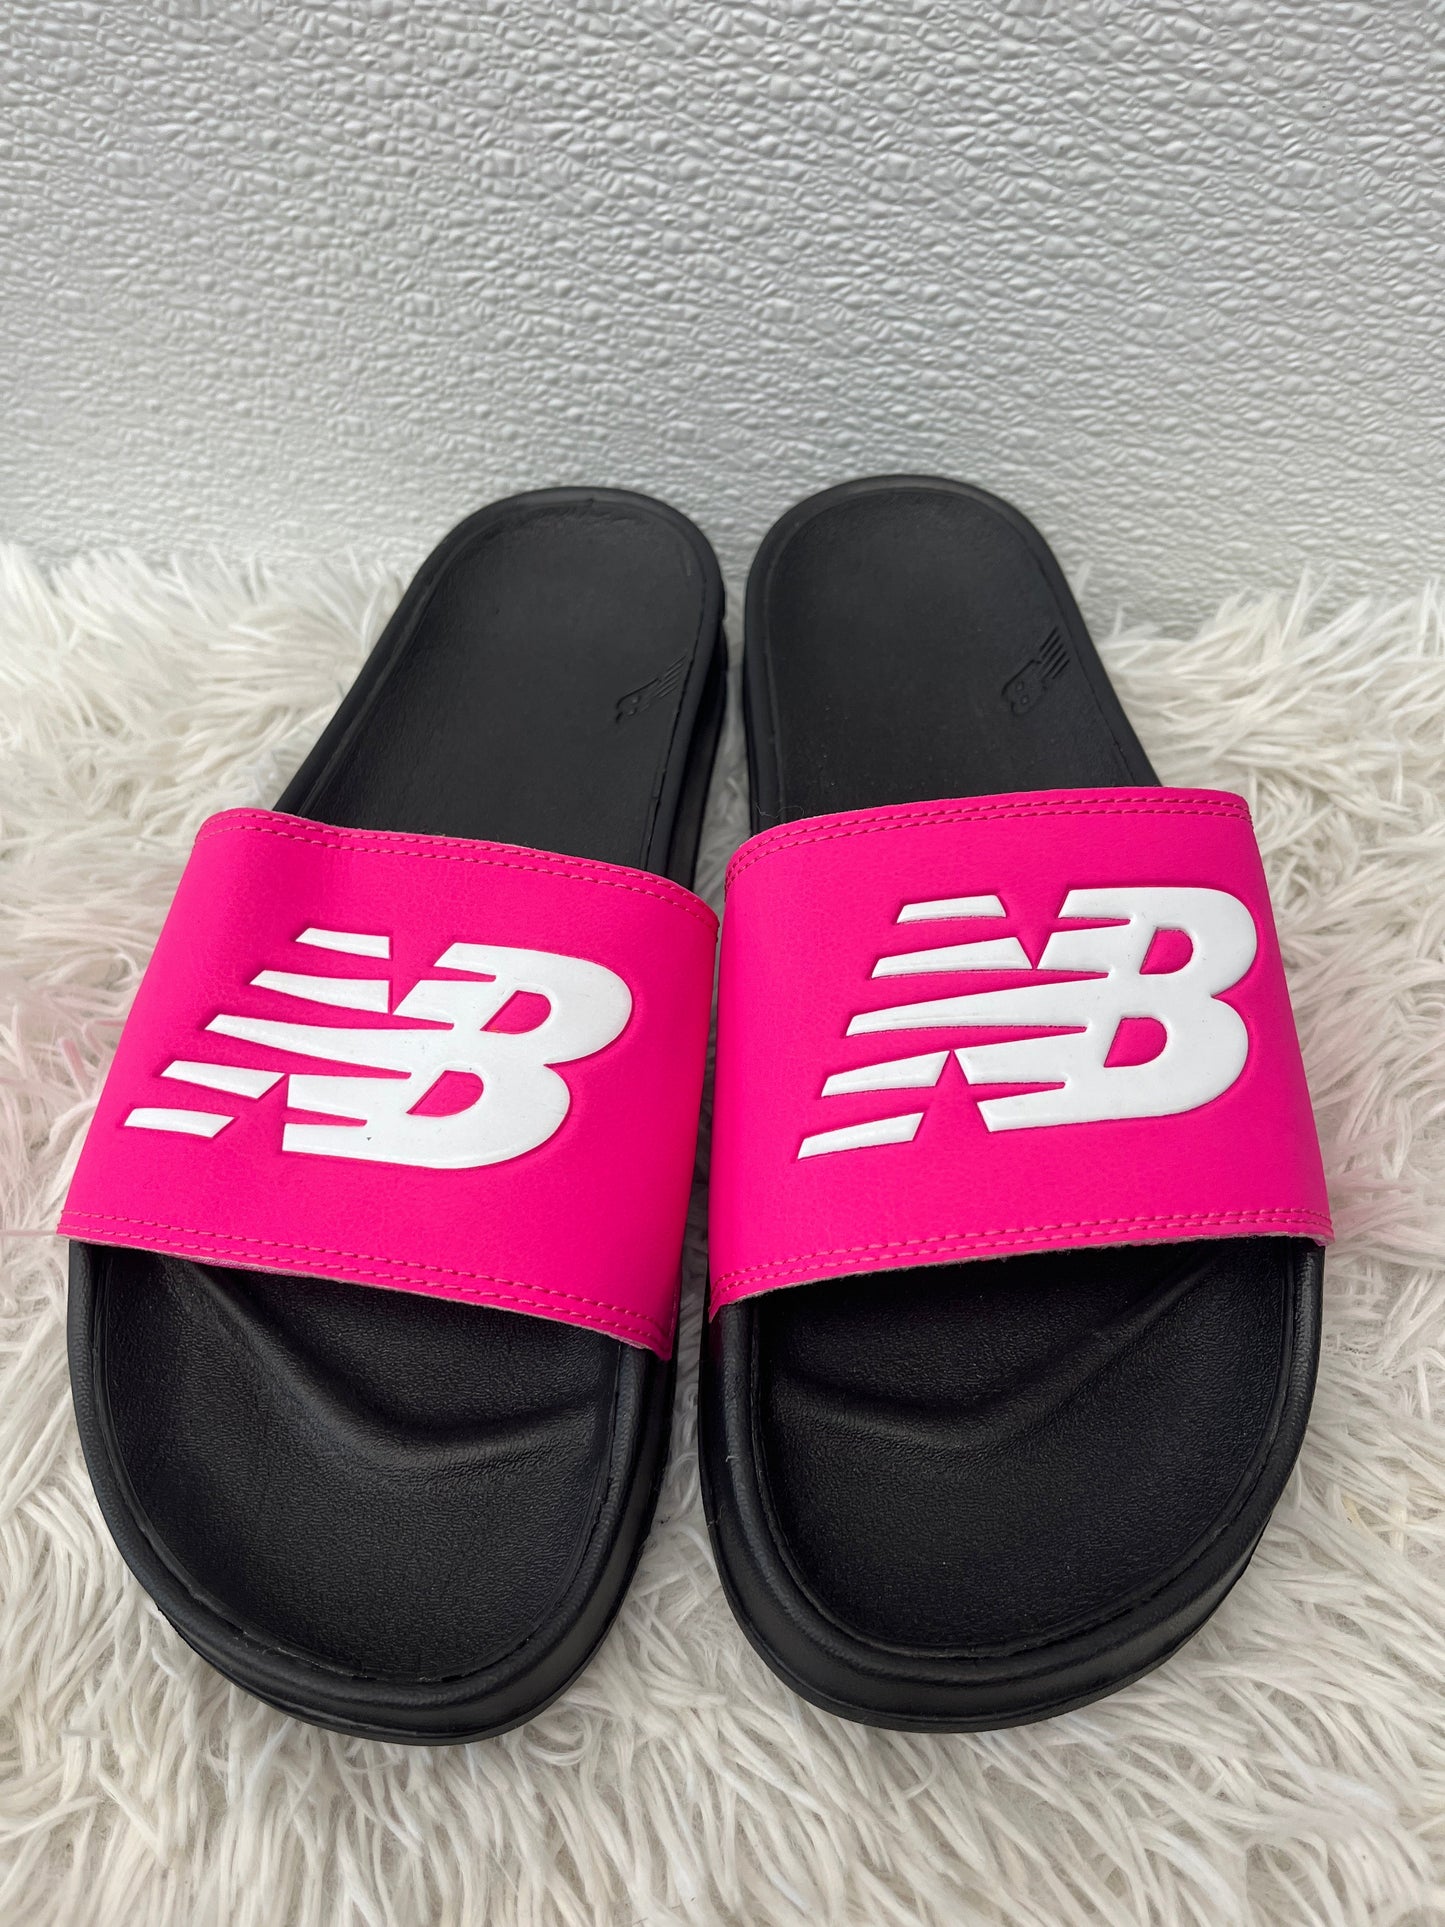 Sandals Flats By New Balance  Size: 11